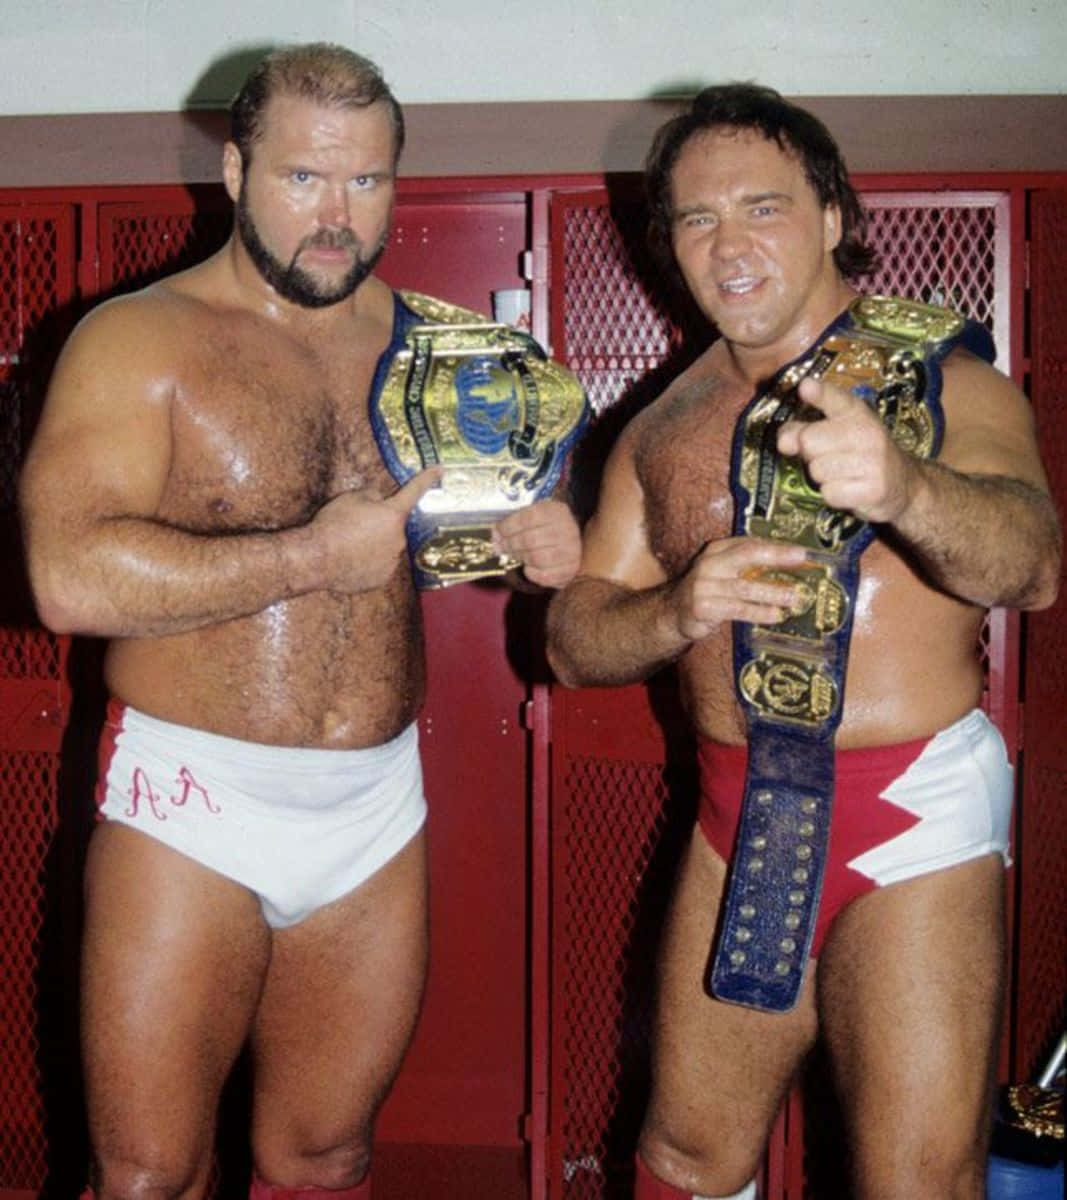 Legendary Wrestlers Larry Zbyszko and Arn Anderson Holding Championship Belts. Wallpaper